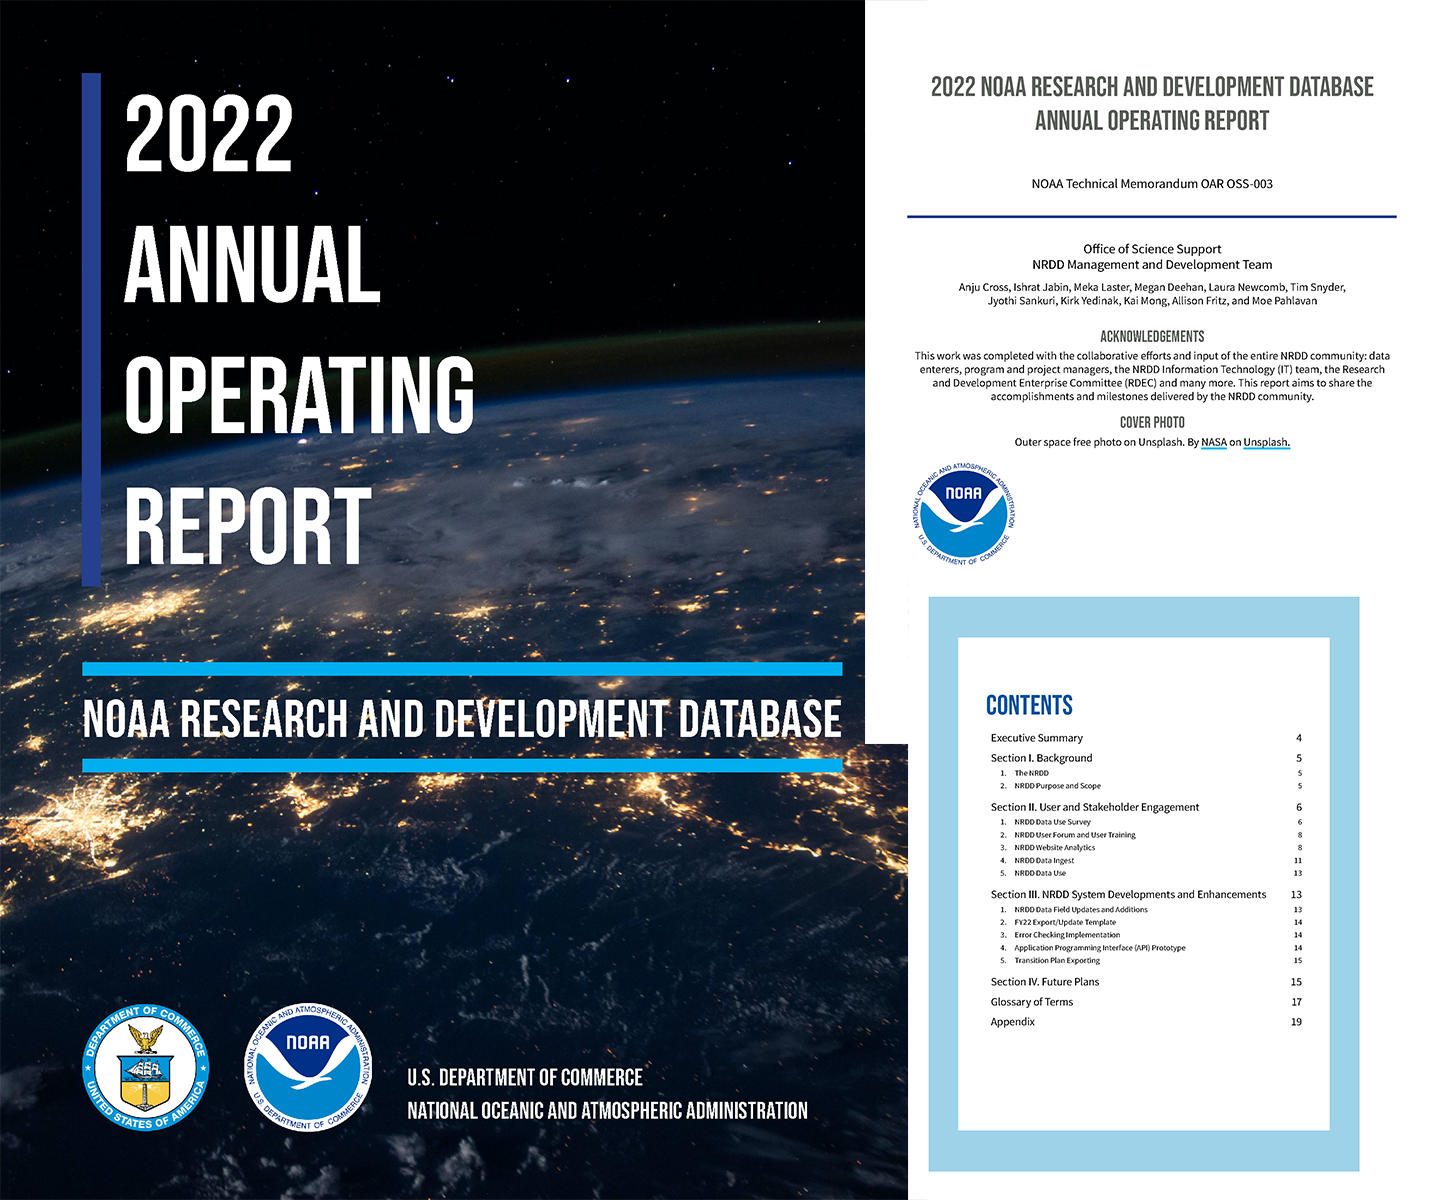 NRDD 2022 Annual Operating Report